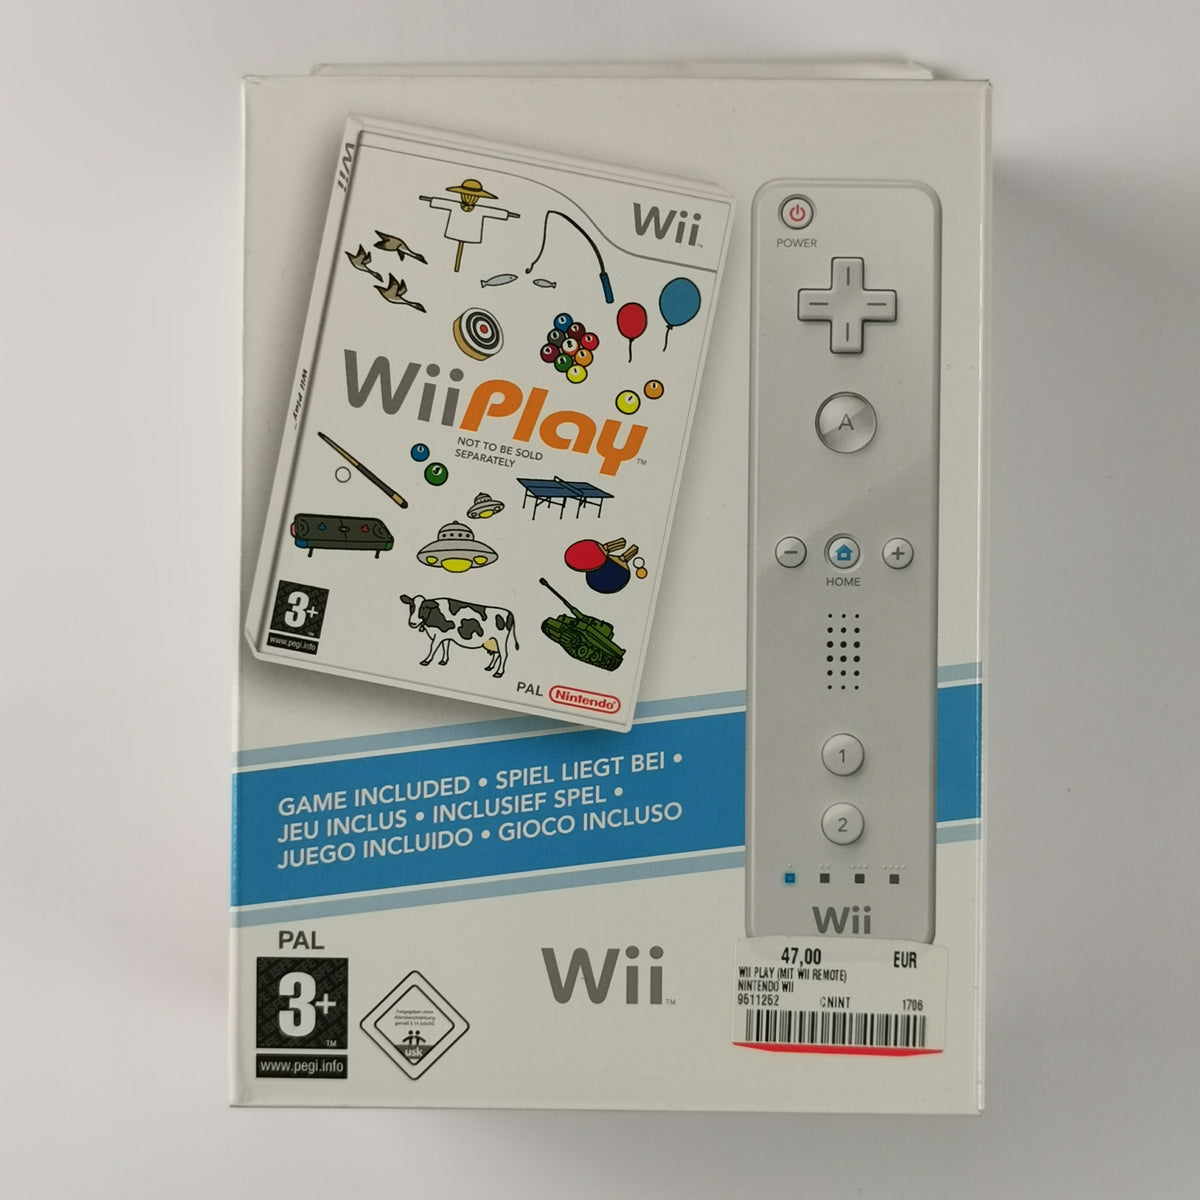 Wii Play (inkl. Wii Remote) [Wii]